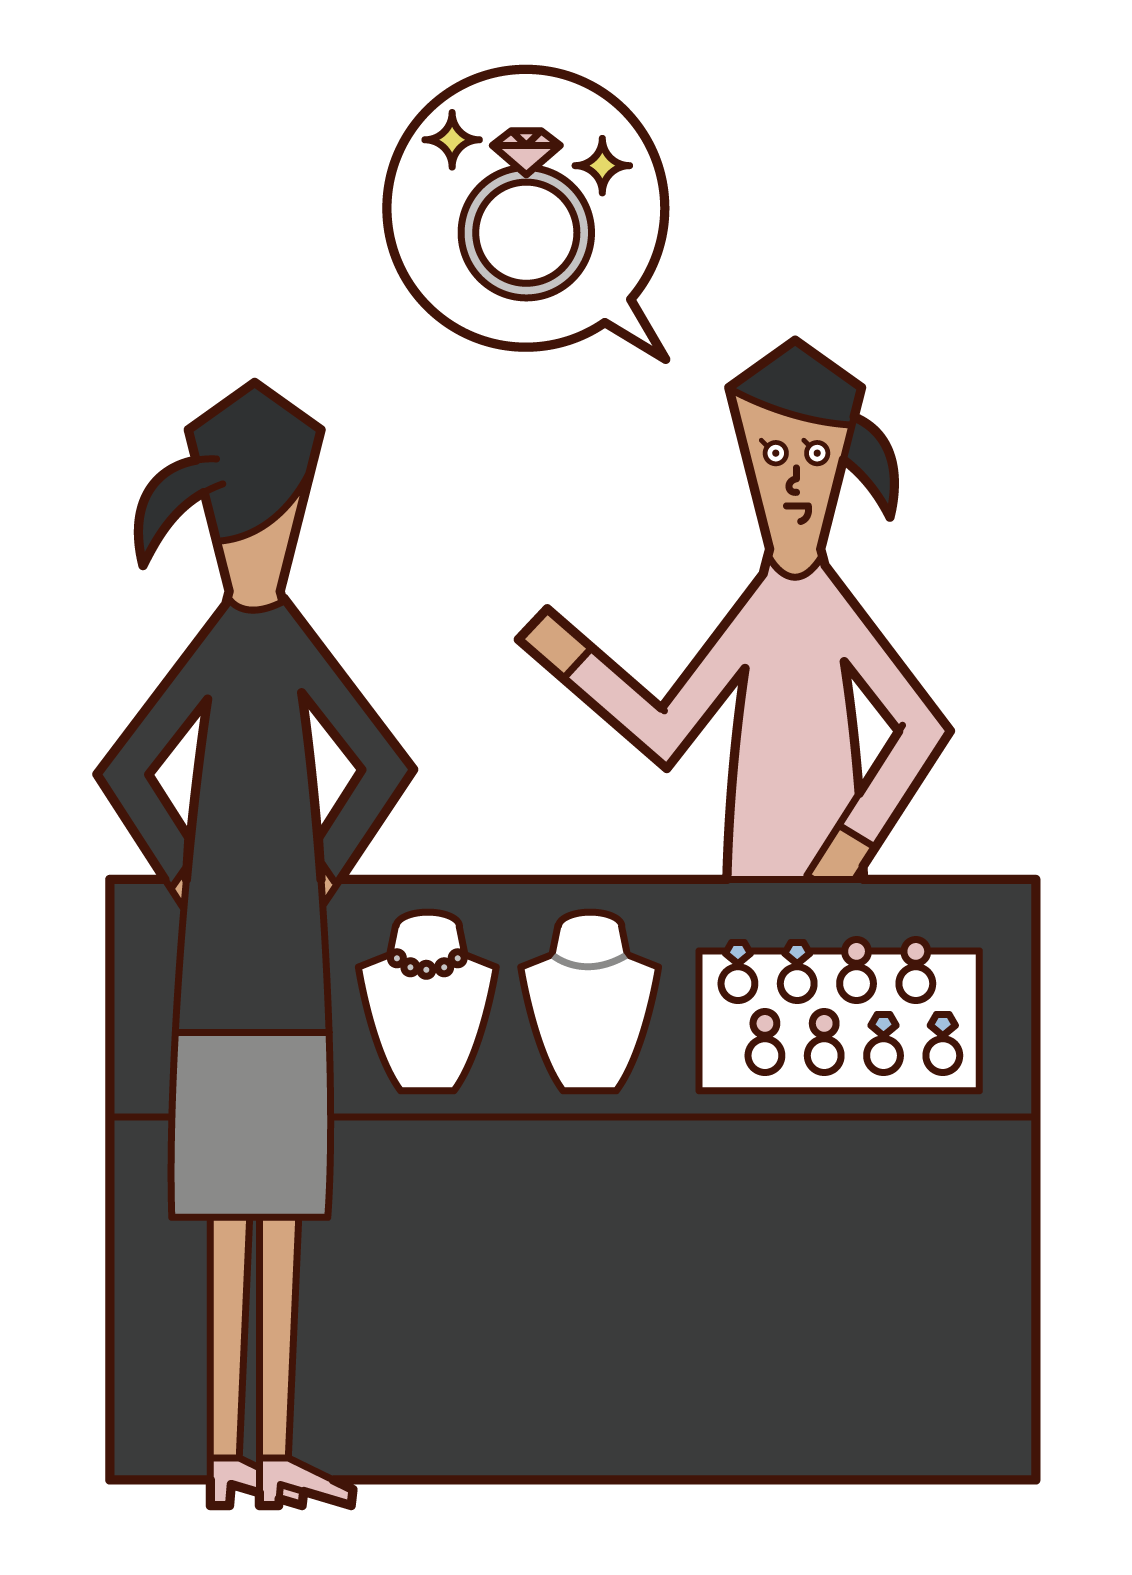 Illustration of a woman buying a ring at a jewelry store